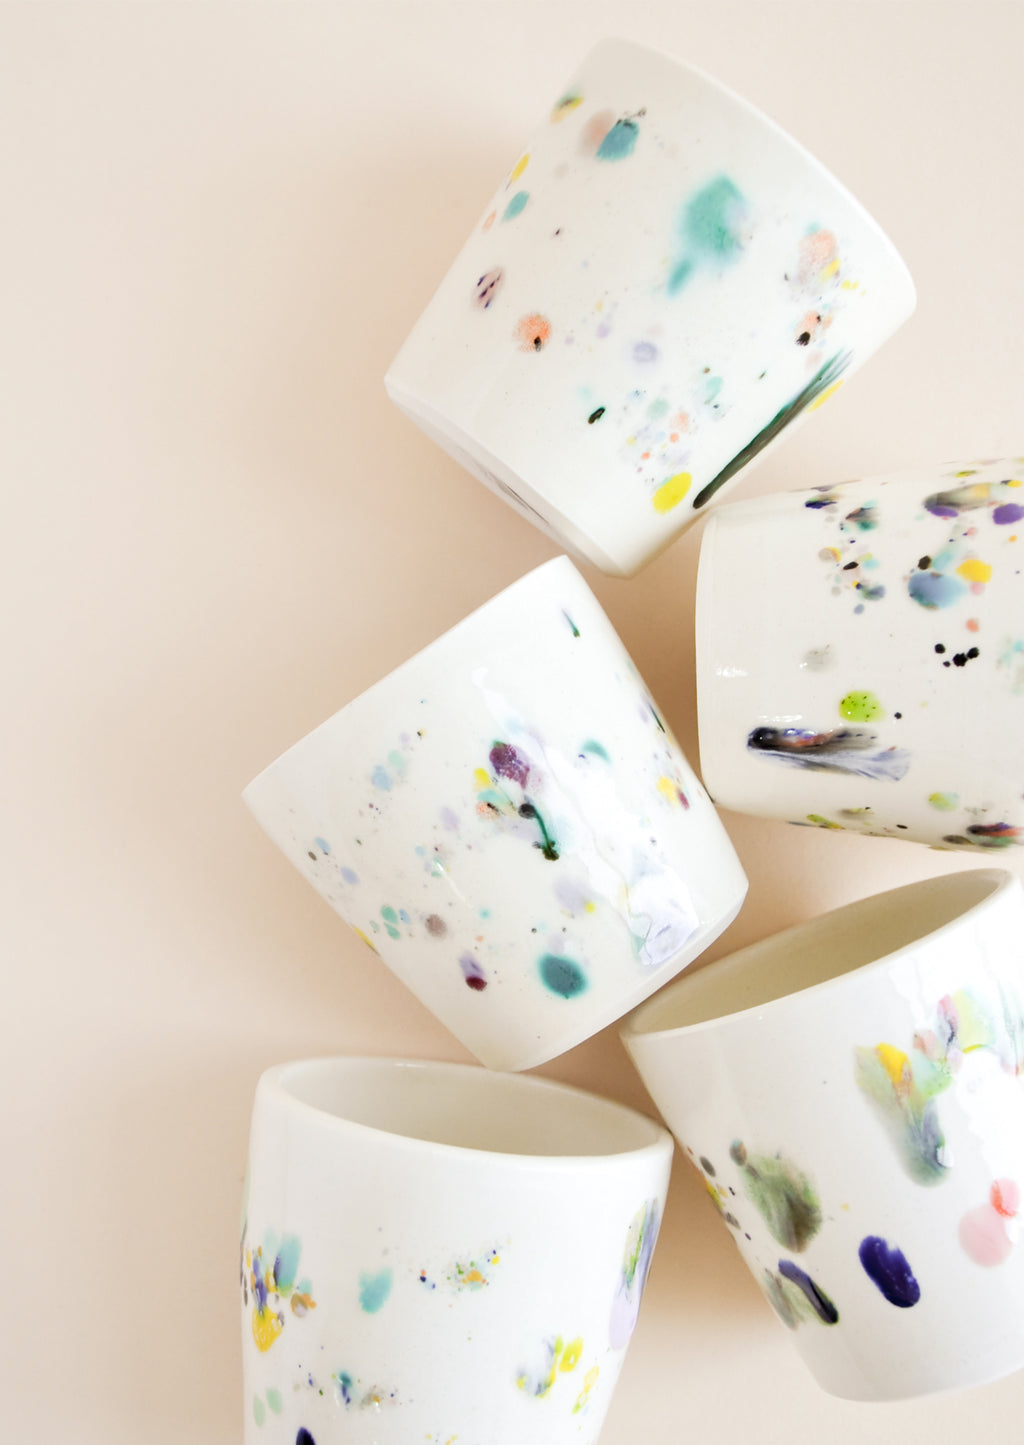 1: Small, one of a kind ceramic tumblers in ivory with colorful drips